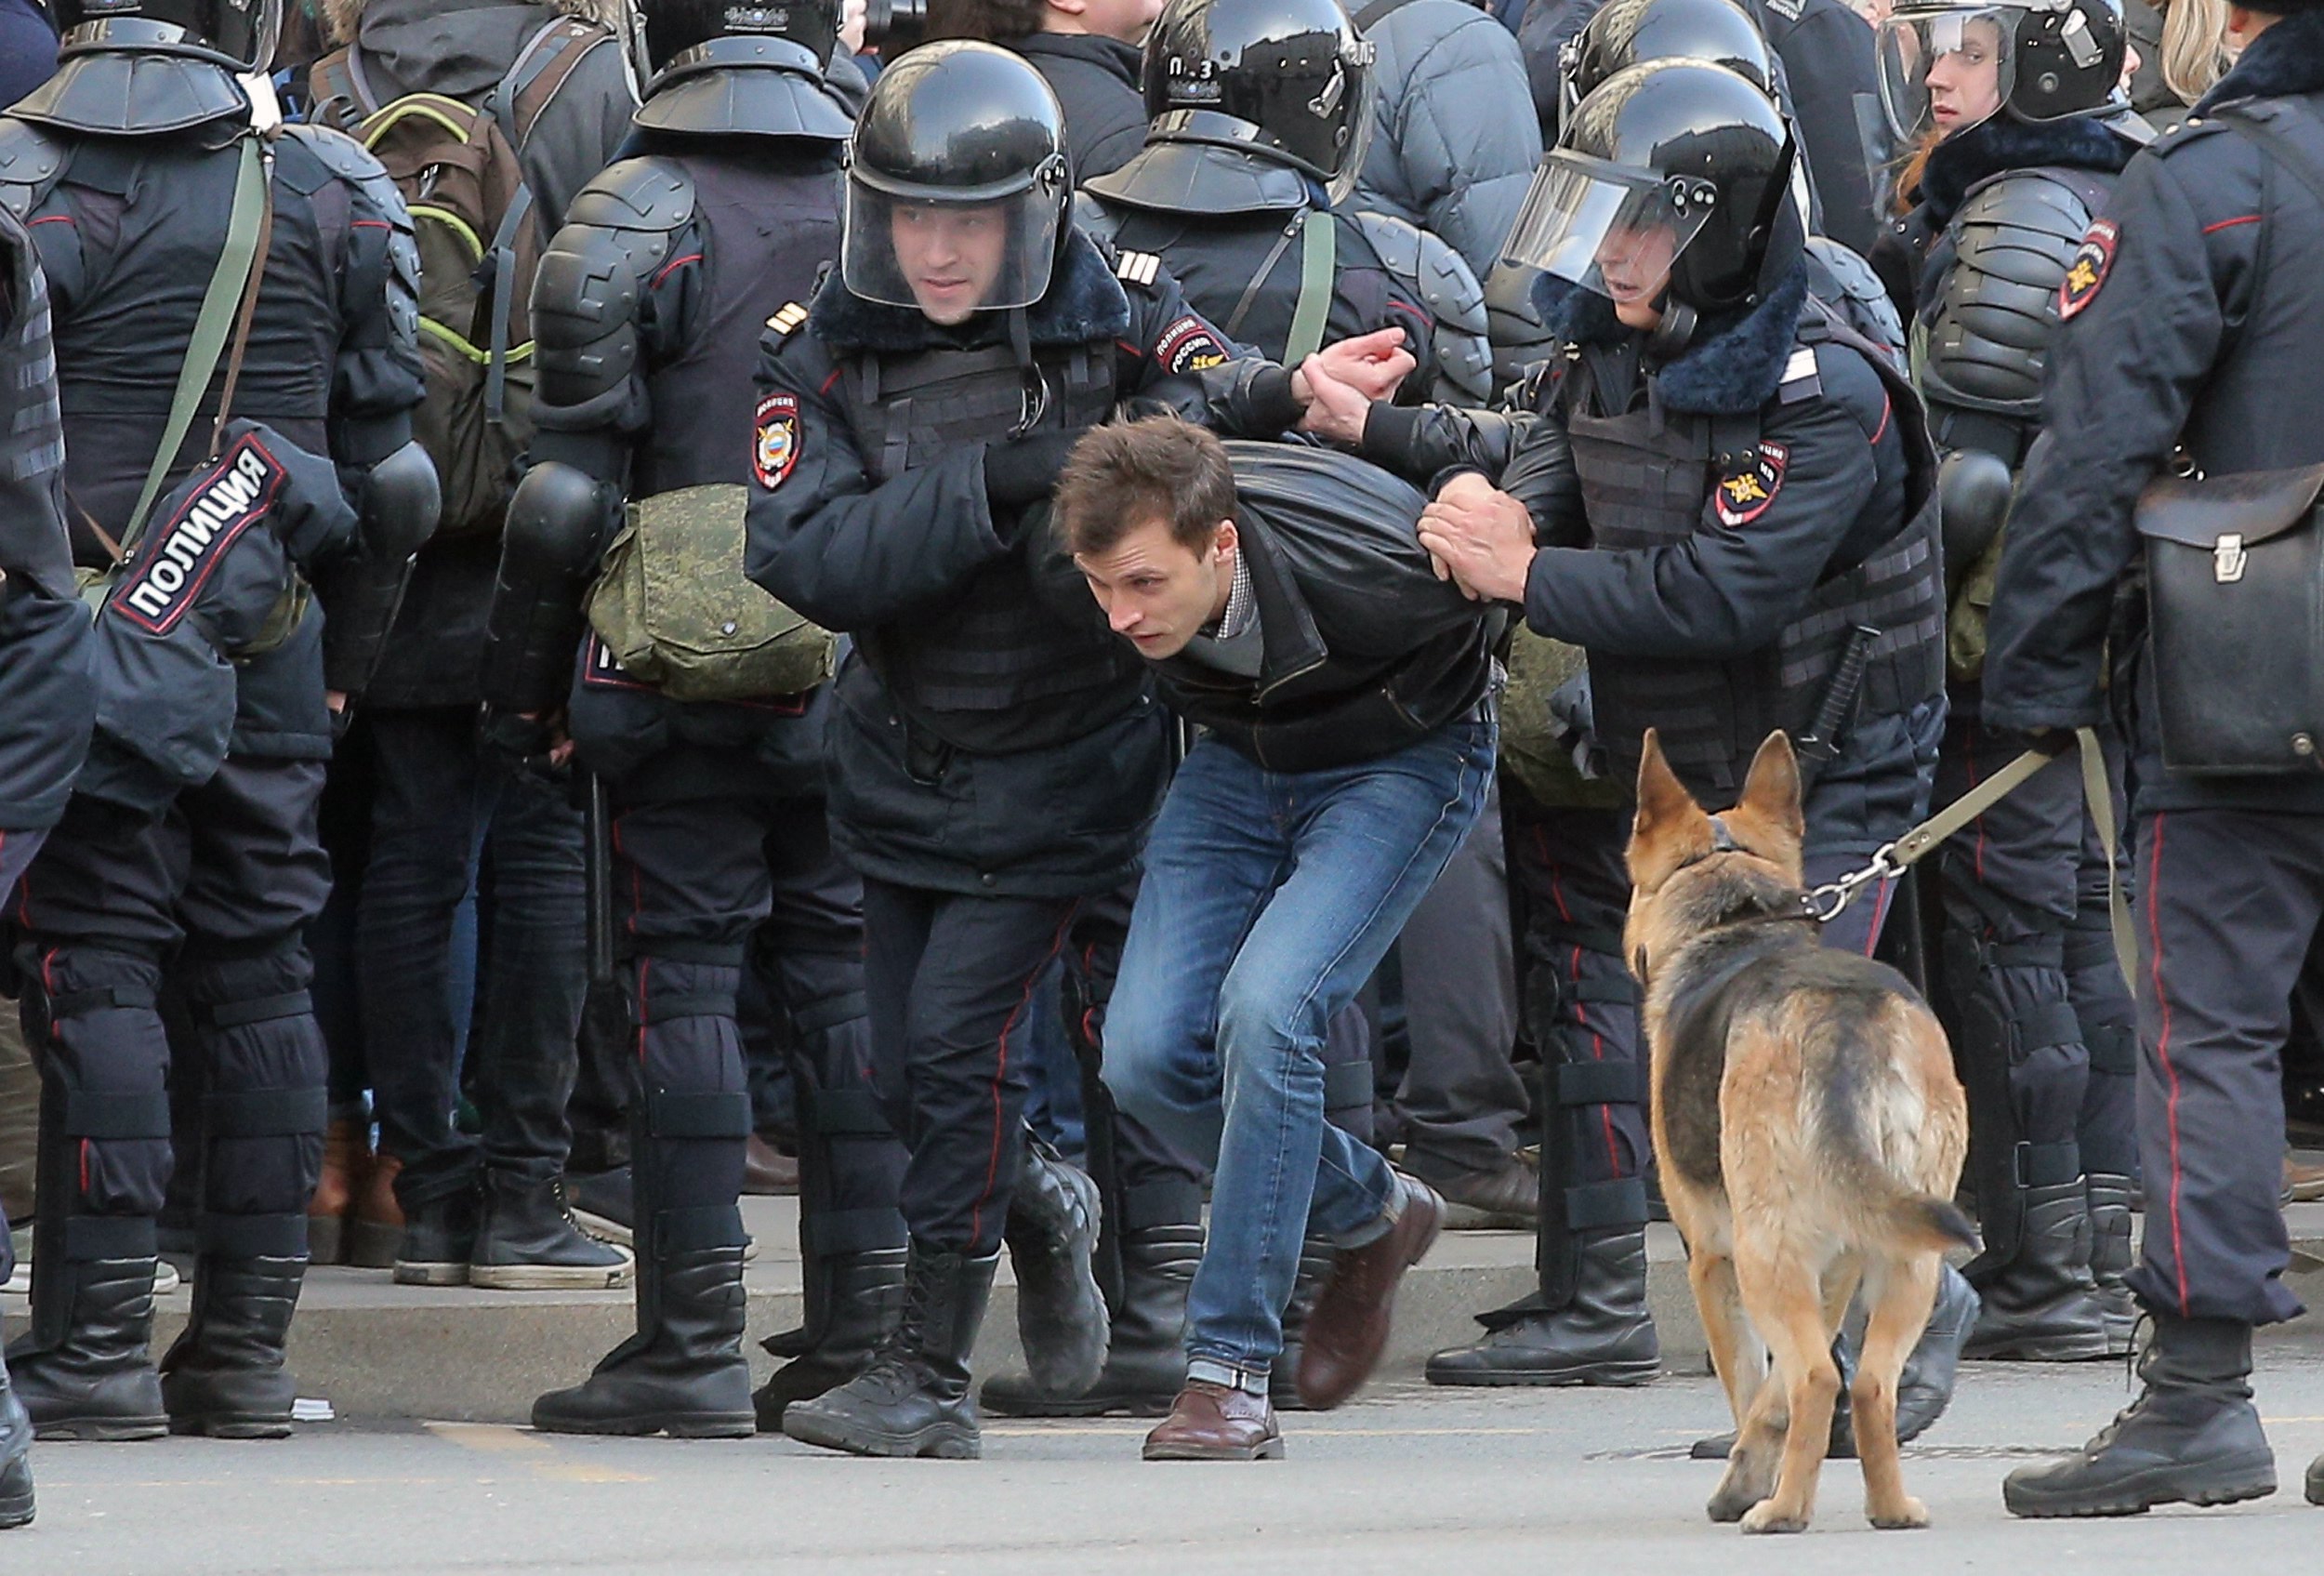 PHOTO: Russian riot policemen detain a demonstrator during an opposition rally in central Moscow, on March 26, 2017.